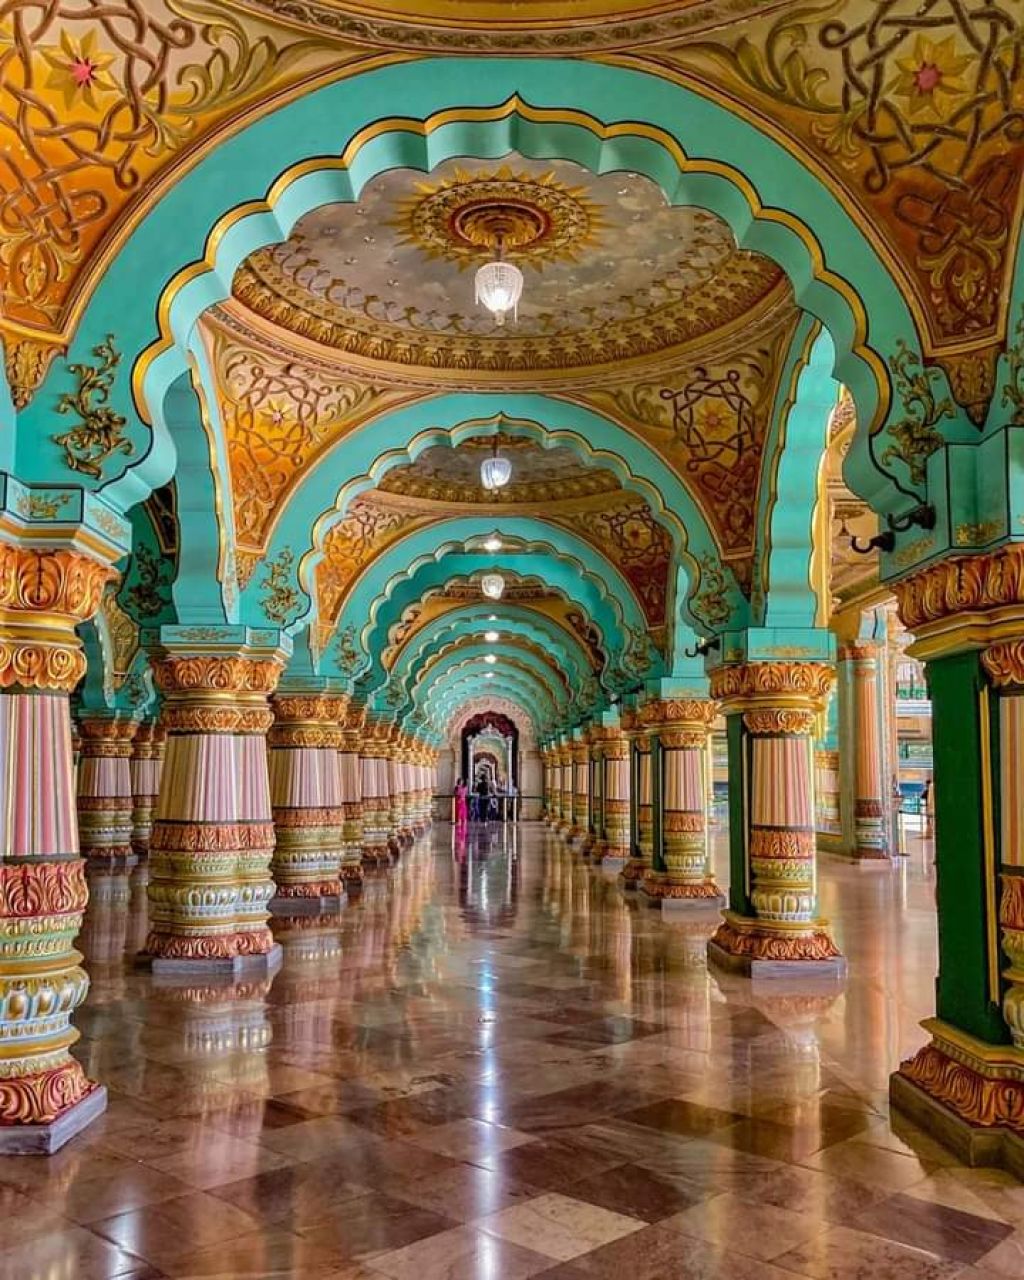 Mysore Palace Also Known As Amba Vilas Palace Is A Historical Palace And A Royal Residence